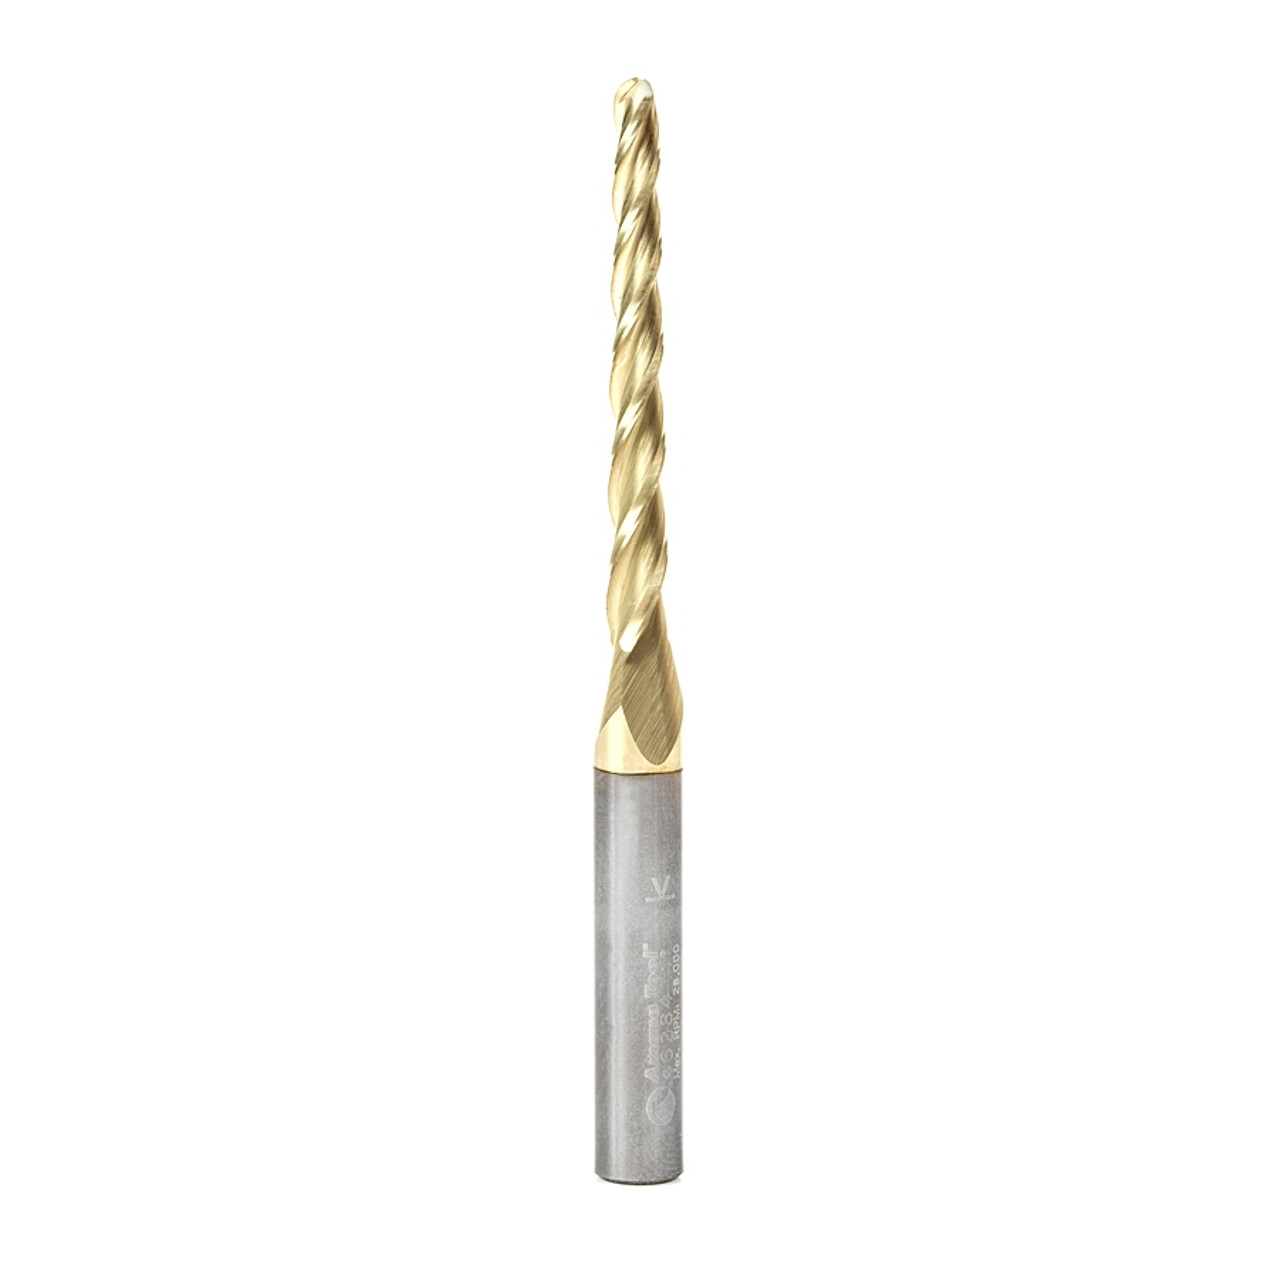 CNC Carving Tapered Ball Nose - Amana Tool 46284, 1/8 D, 3 Flute